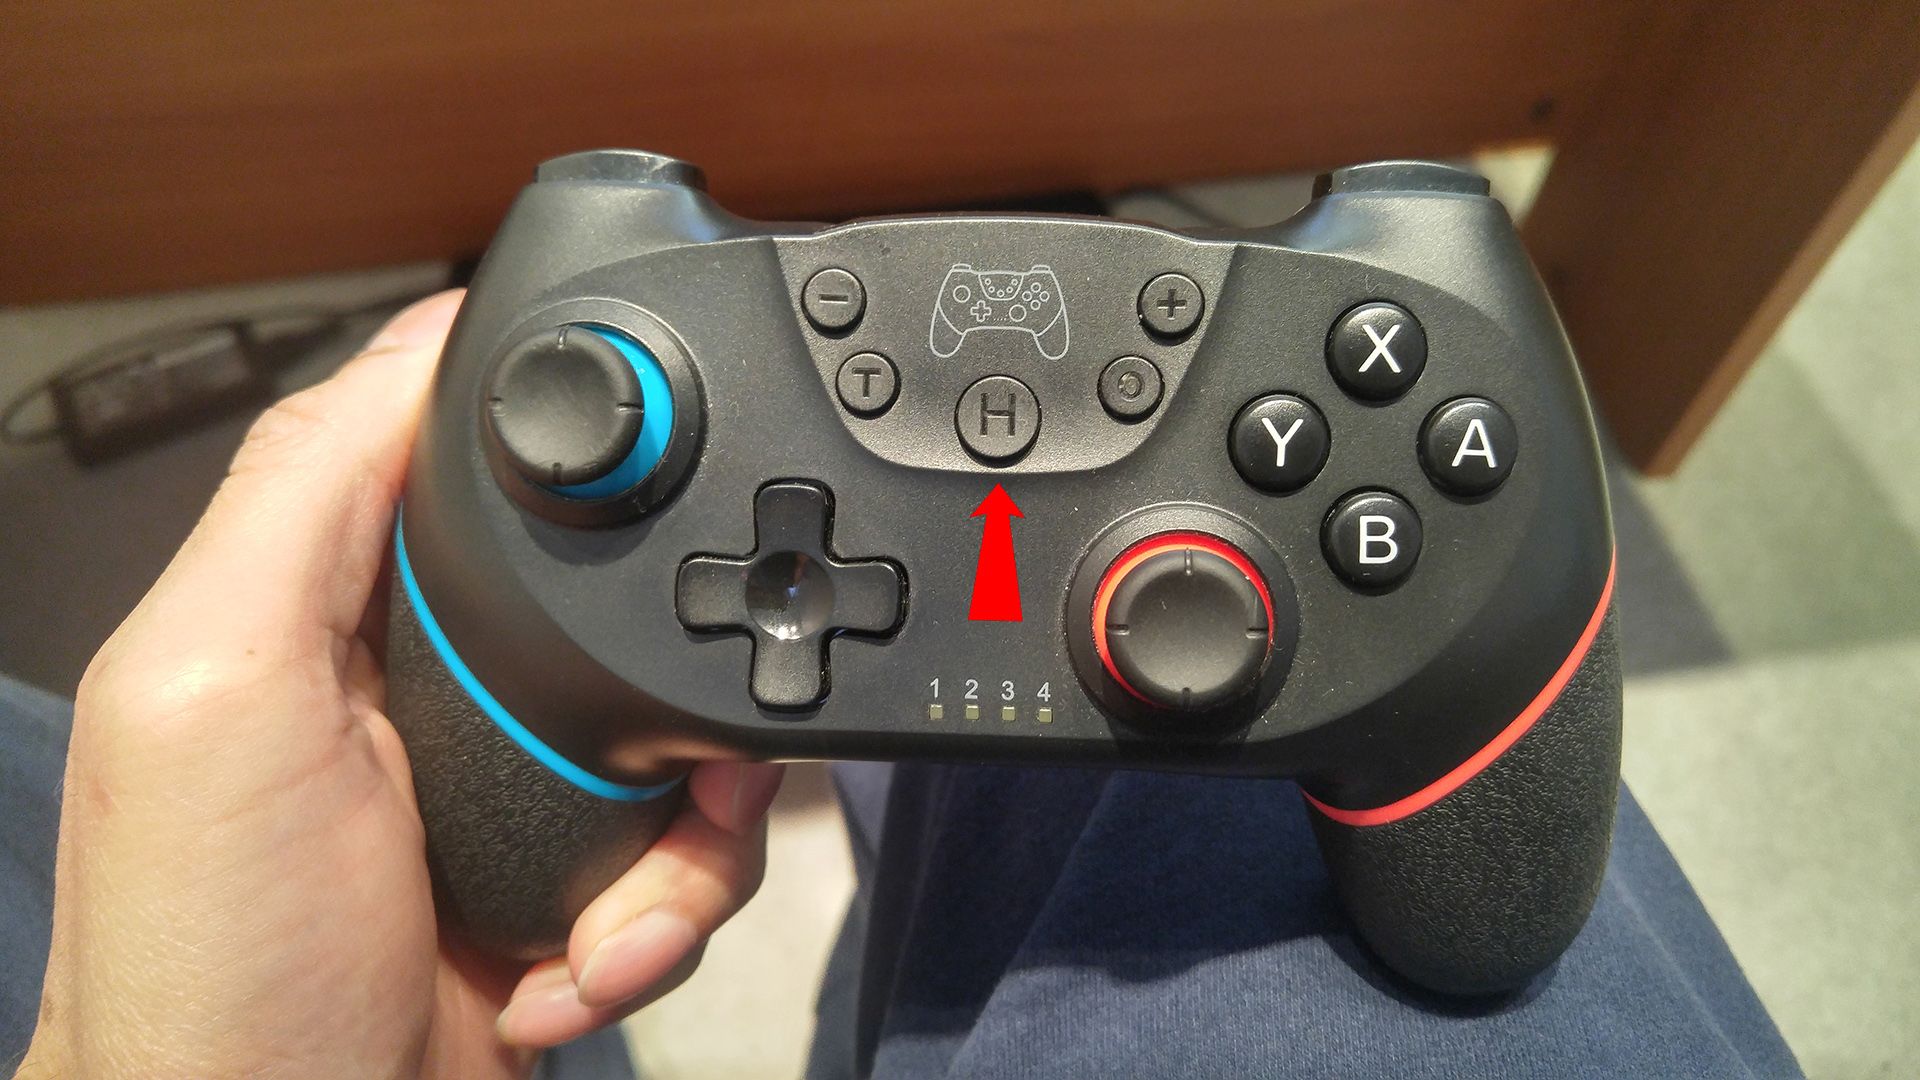 The front of a third-party Nintendo Switch controller.